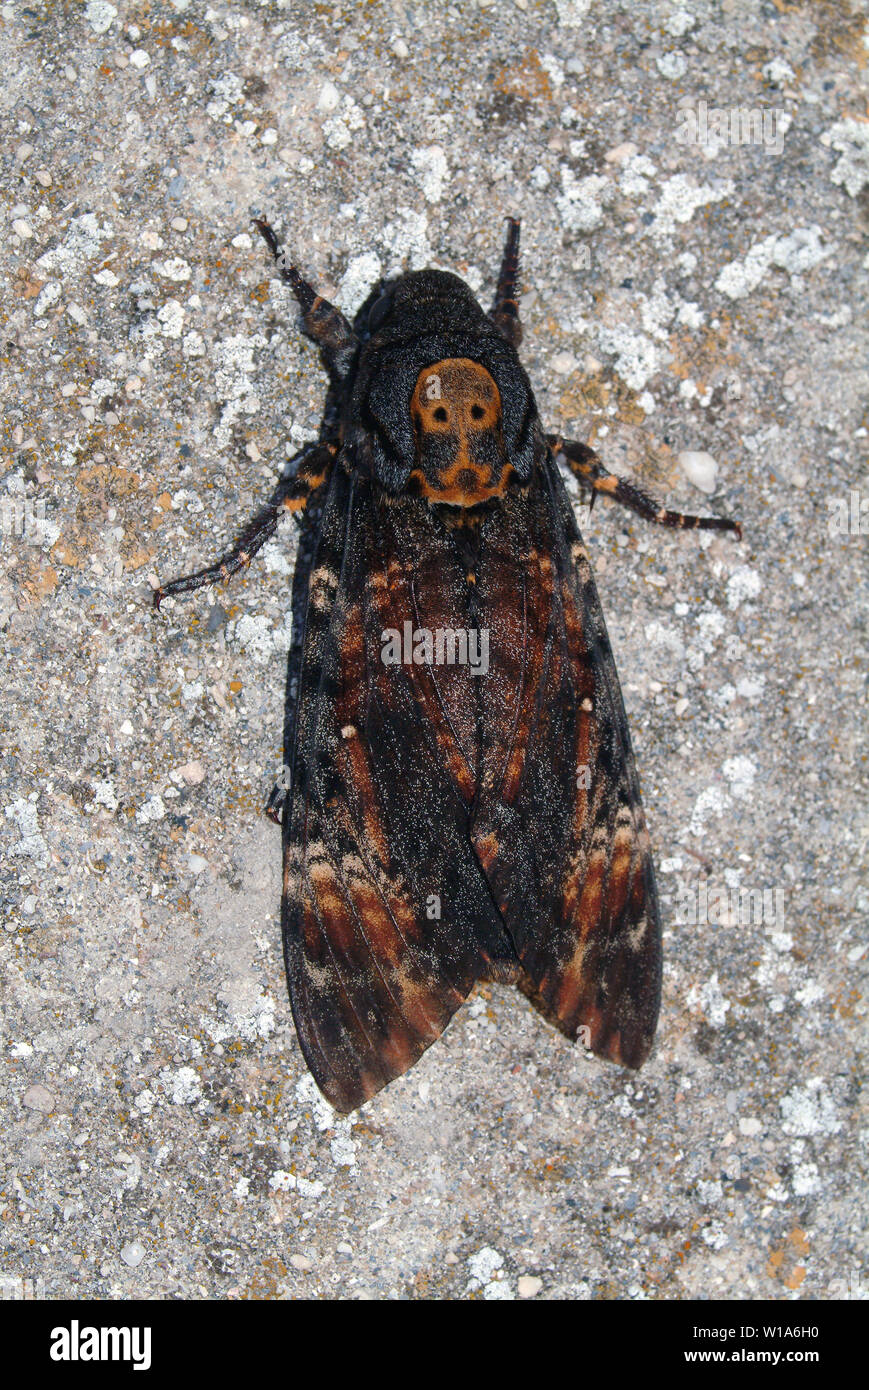 Death's Head Hawkmoth, Insects, Invertebrates, Animals